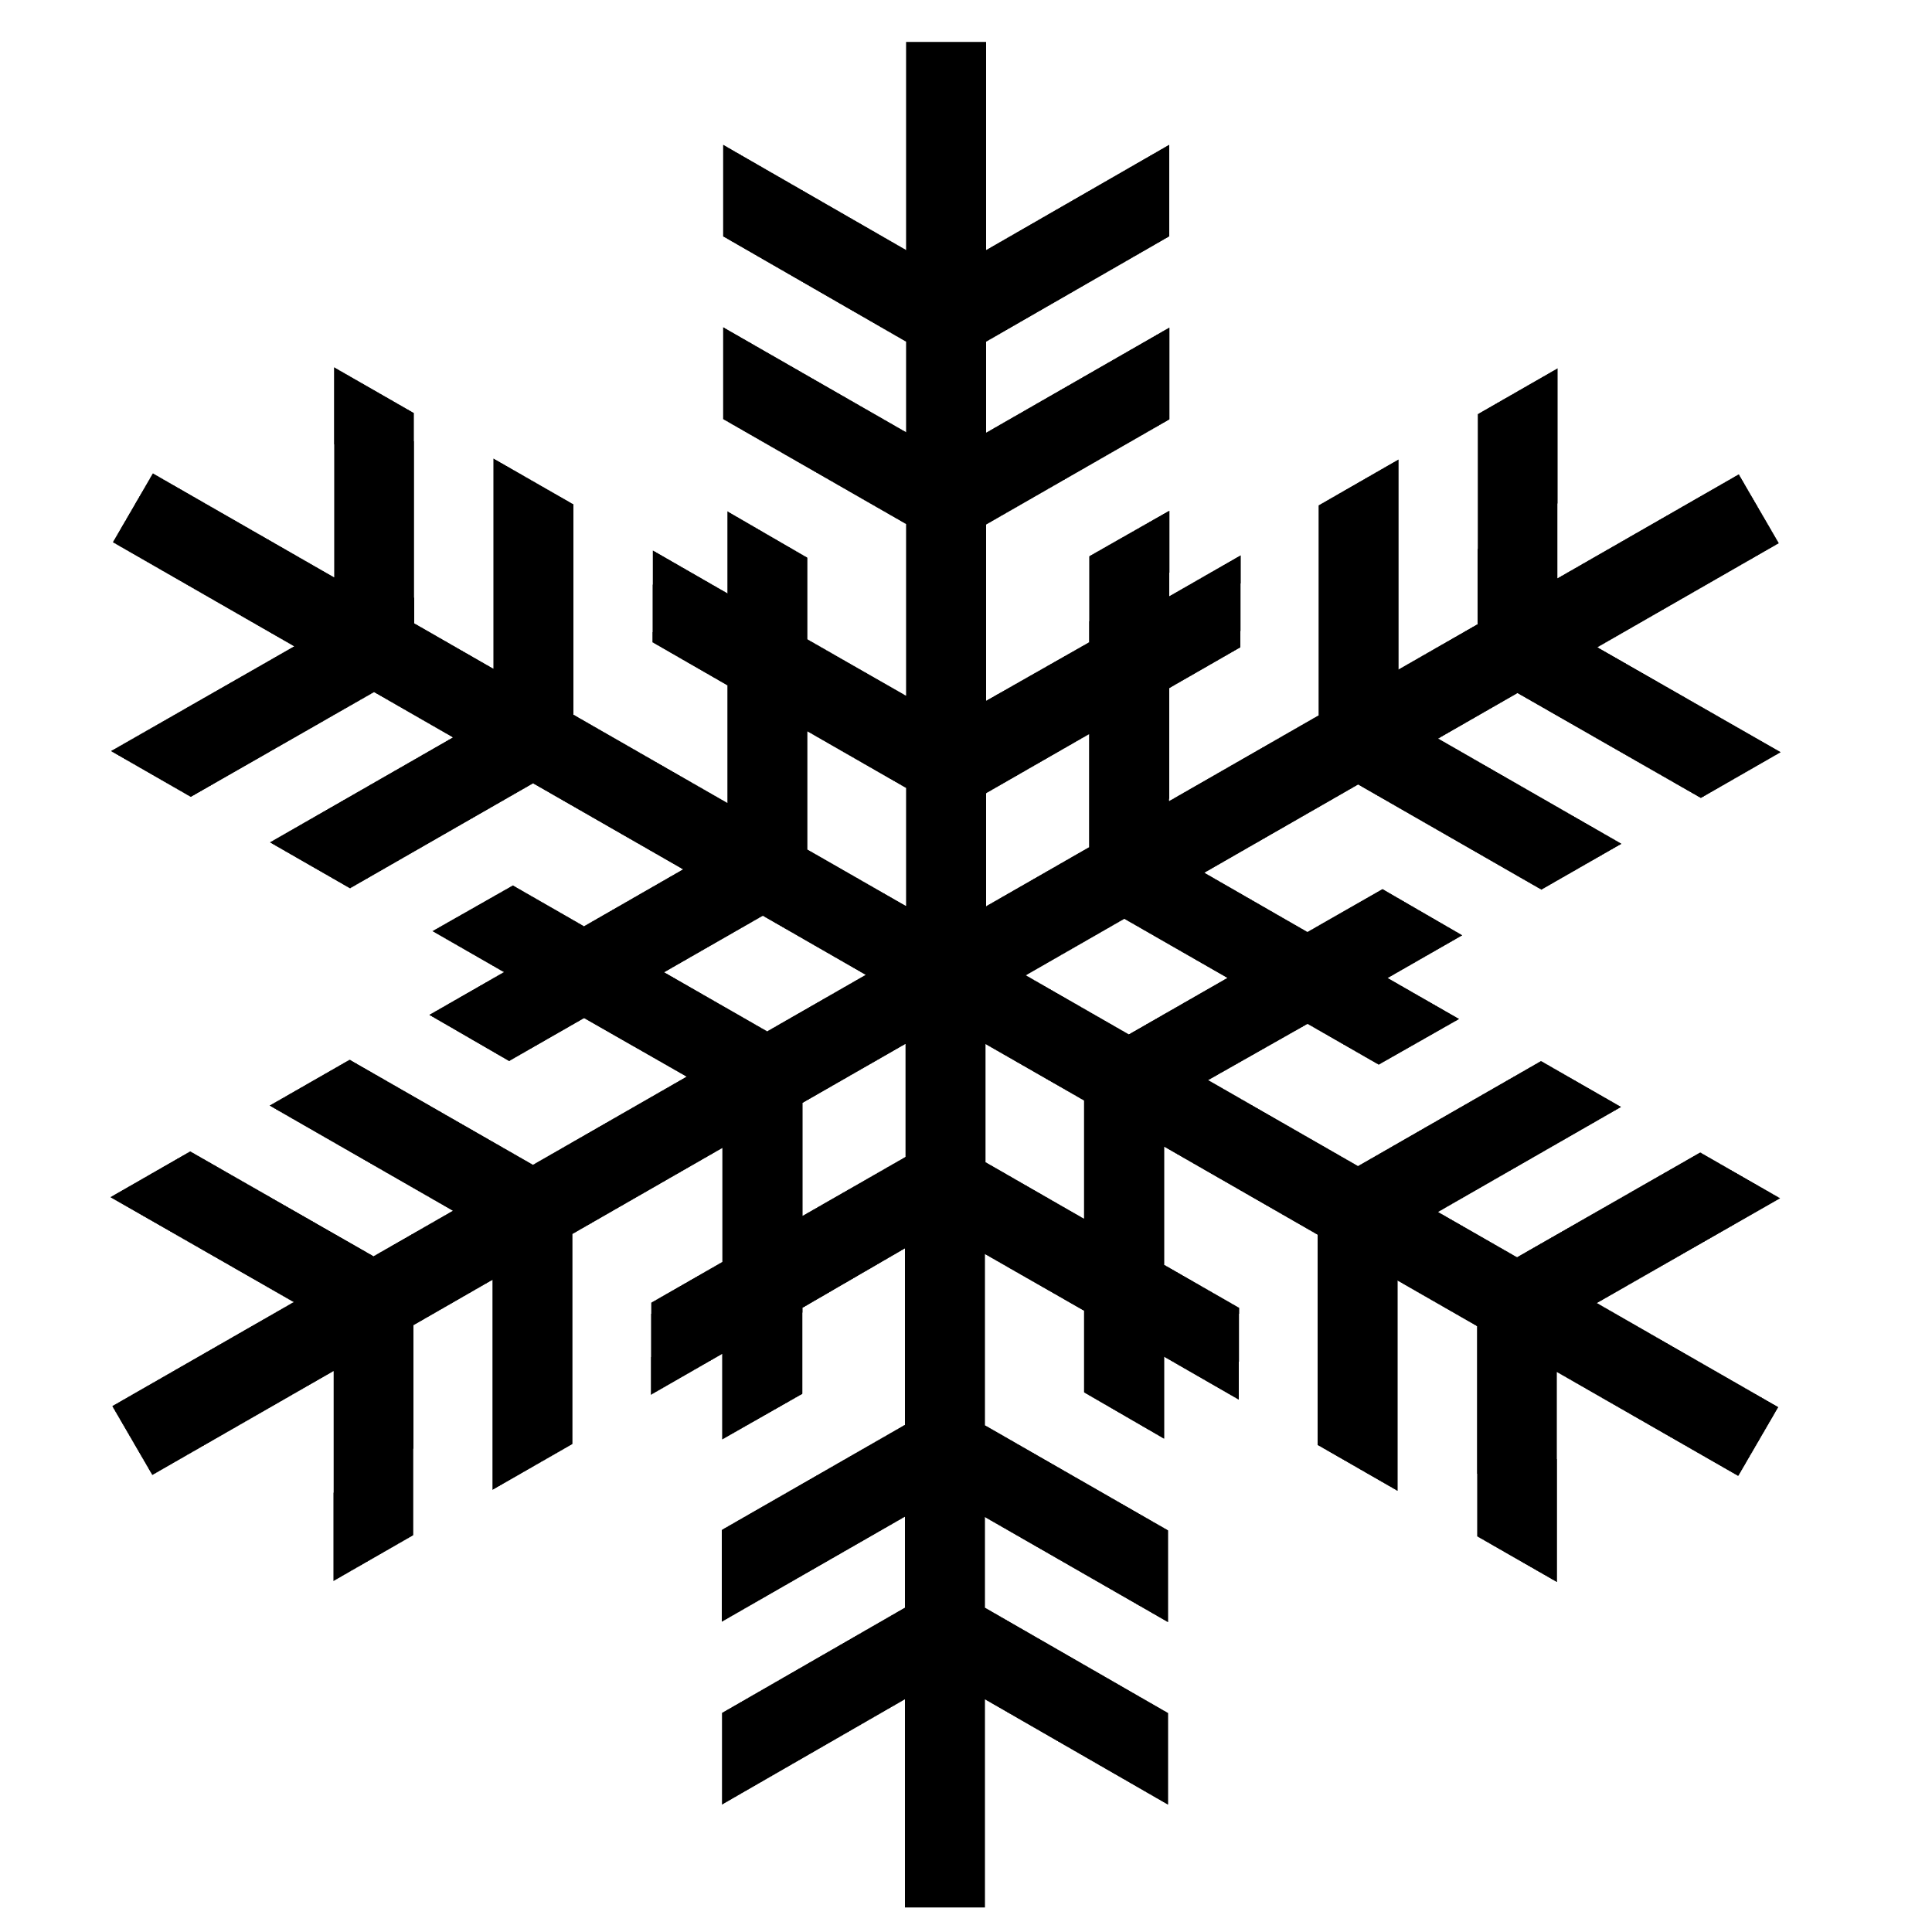 Snowflake Silhouette - ClipArt Best